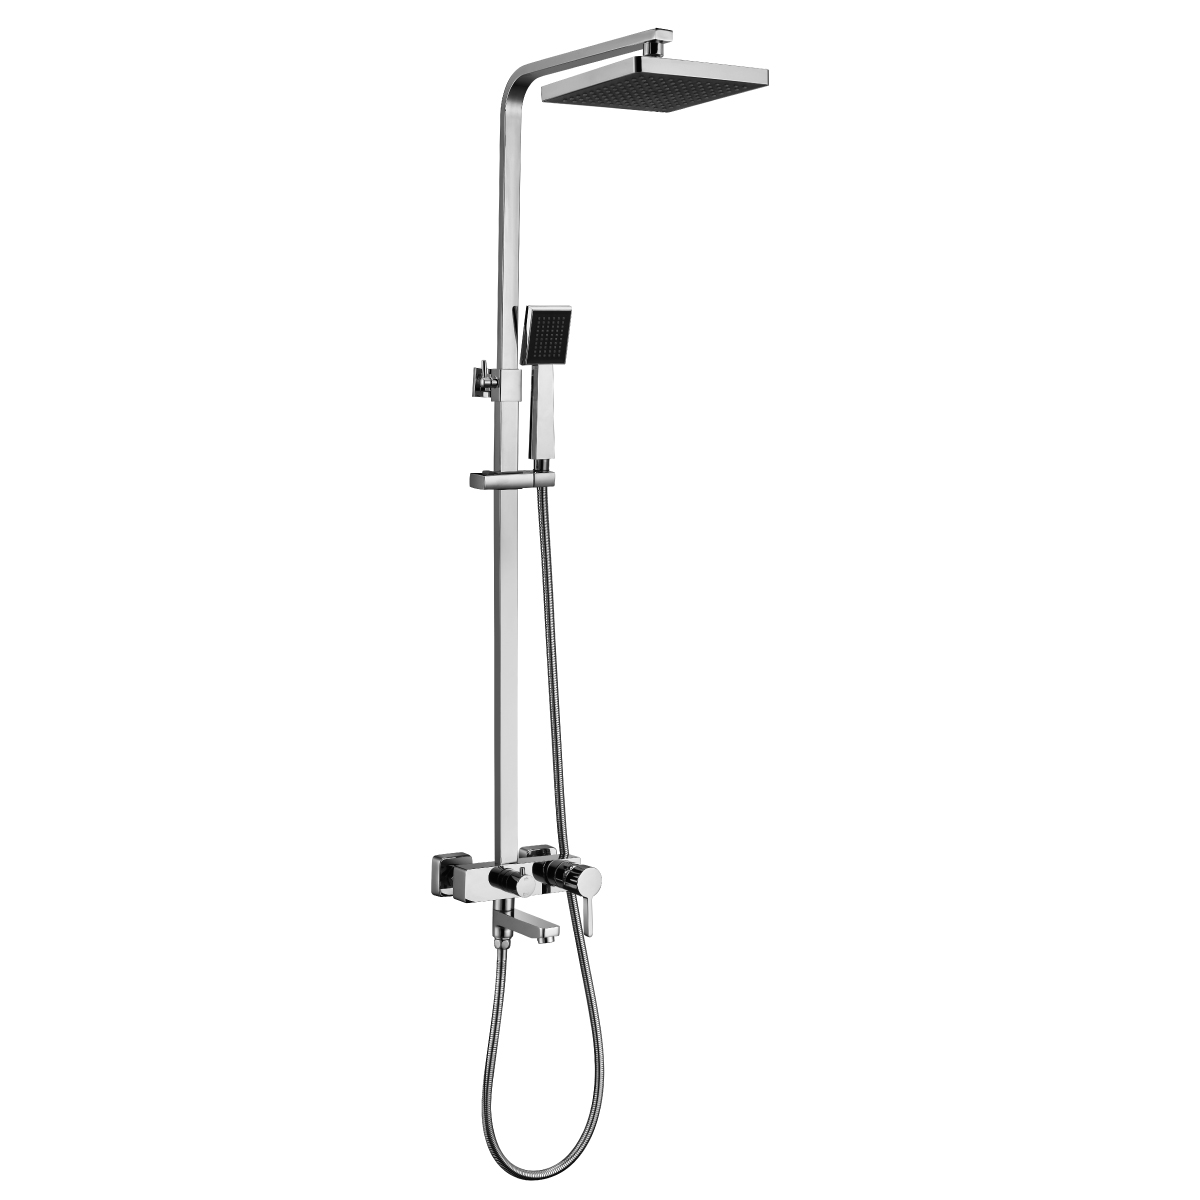 LM7004C Bath and shower faucet with adjustable rod height, swivel spout and «Tropical rain» shower head